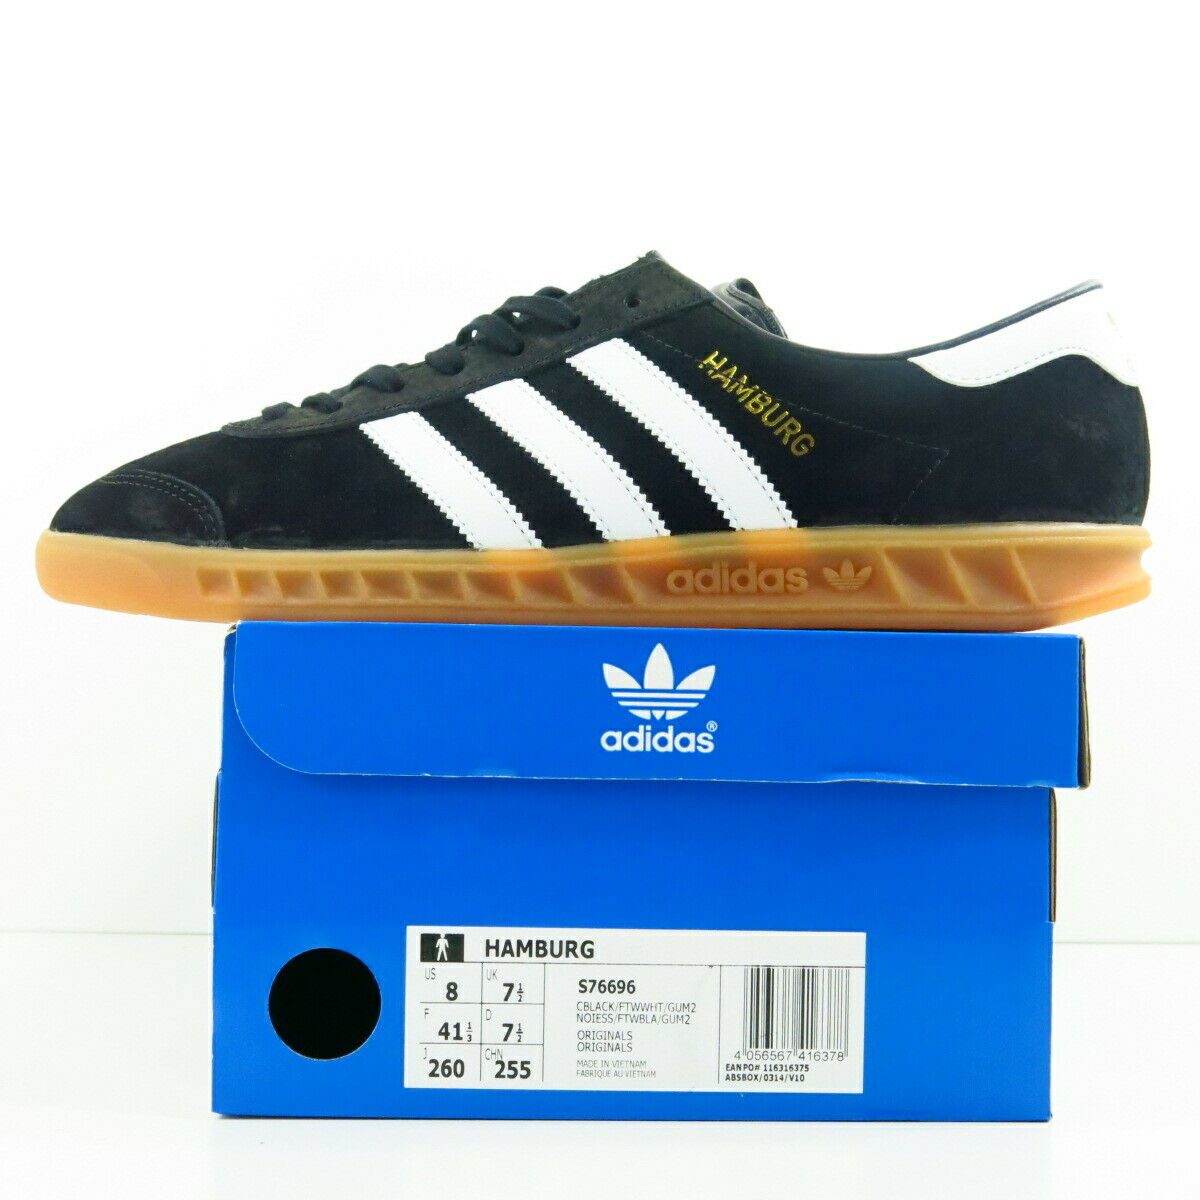 Adidas Originals Hamburg Suede Sneakers Trainers – S76696 Black – 100%  Genuine | Old Firm Boots